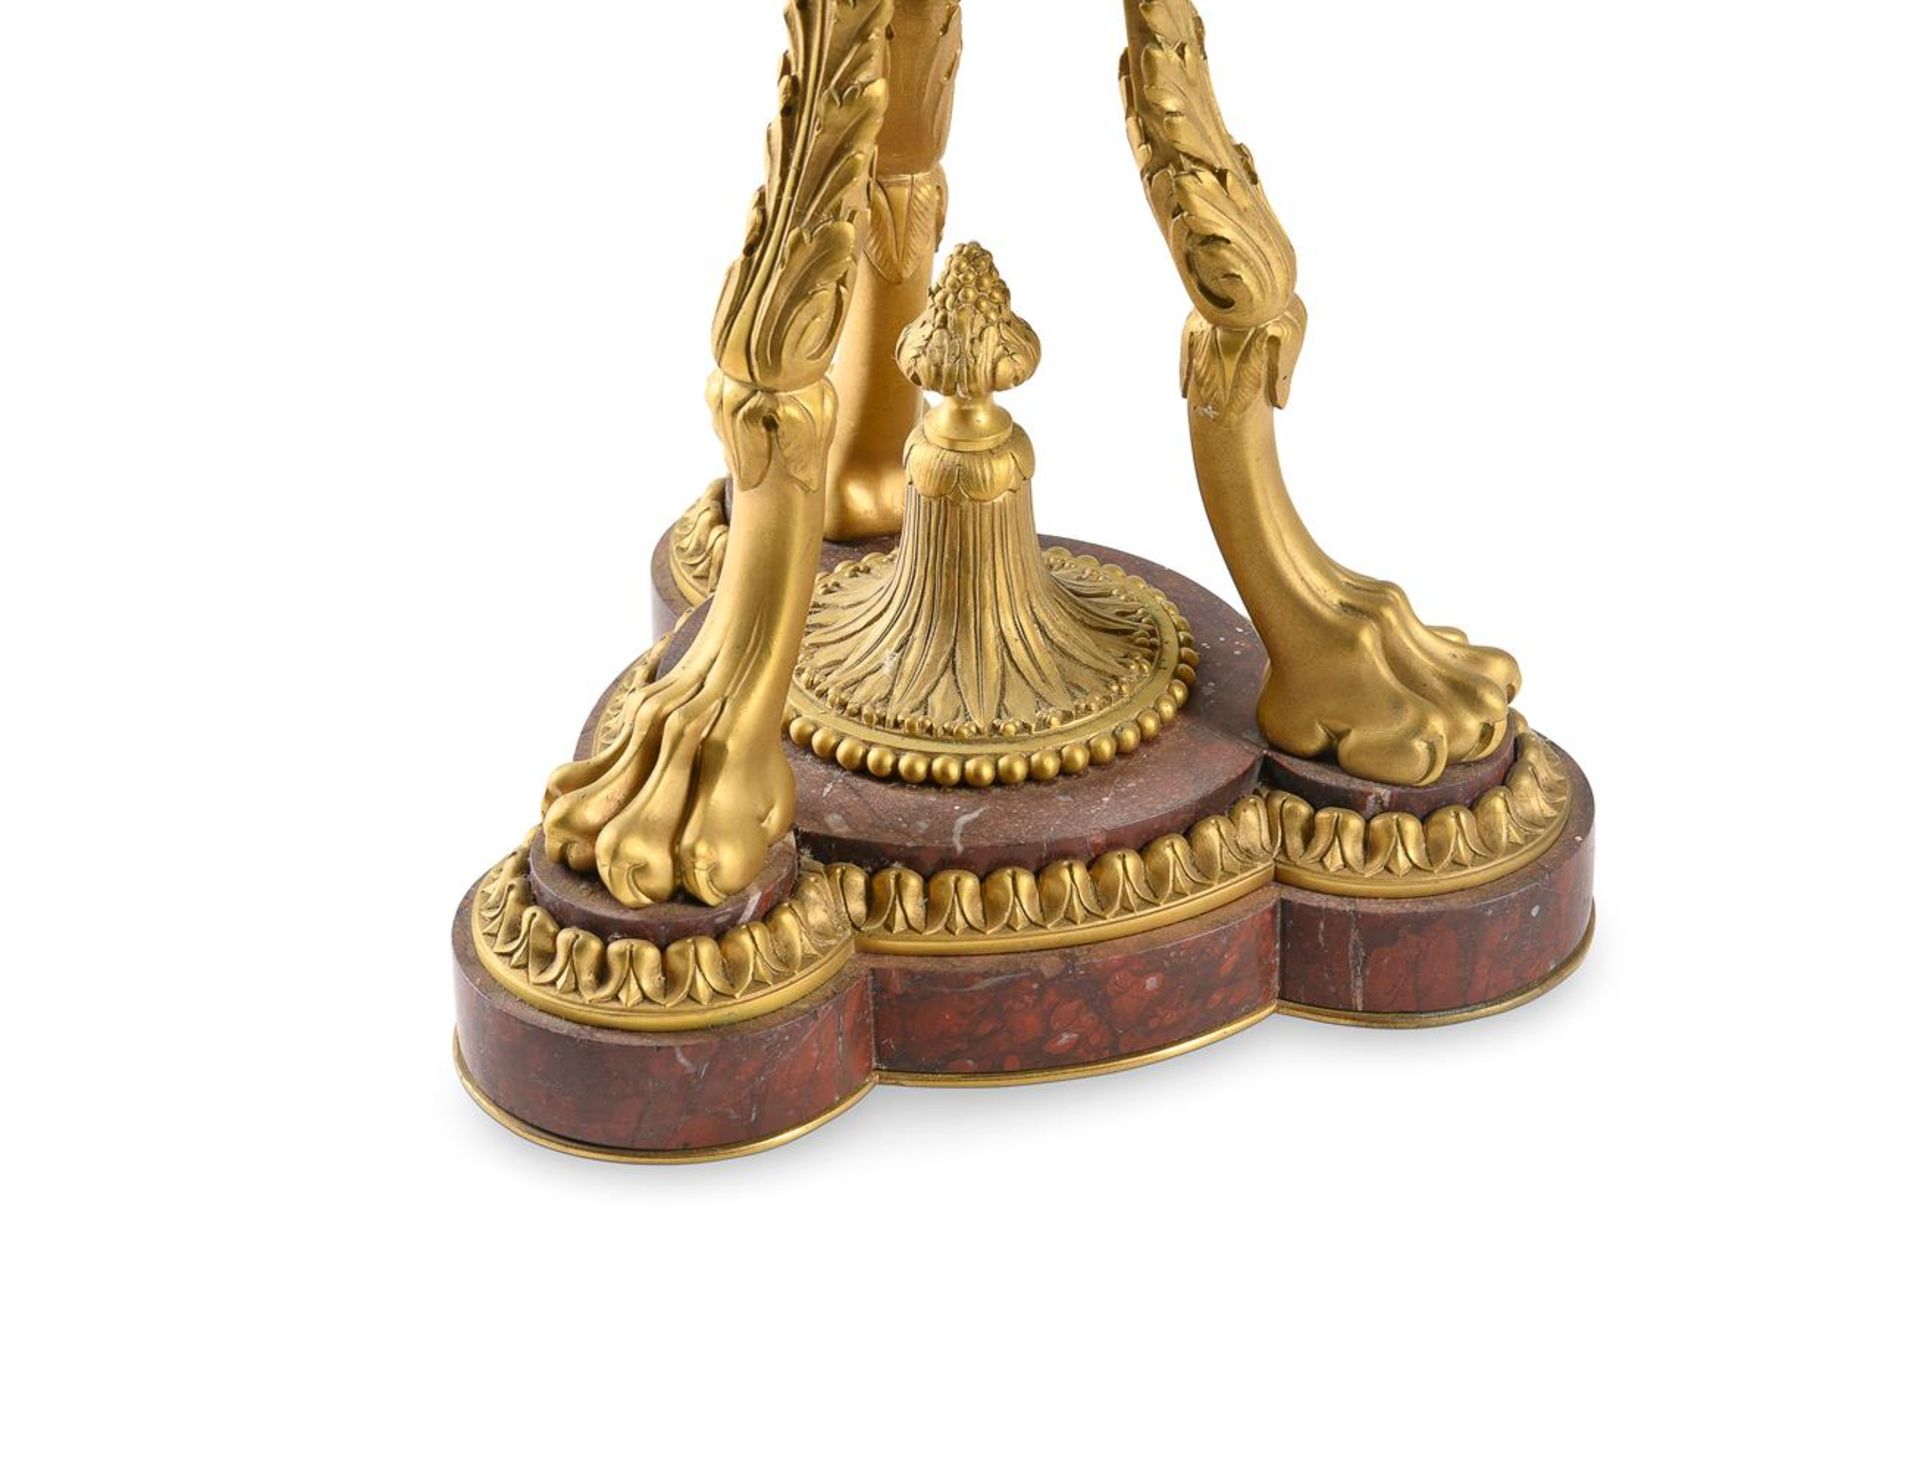 A LARGE PAIR OF FRENCH ORMOLU MOUNTED ROUGE GRIOTTE MARBLE BRULE PARFUMS, 19TH OR 20TH CENTURY - Image 4 of 4